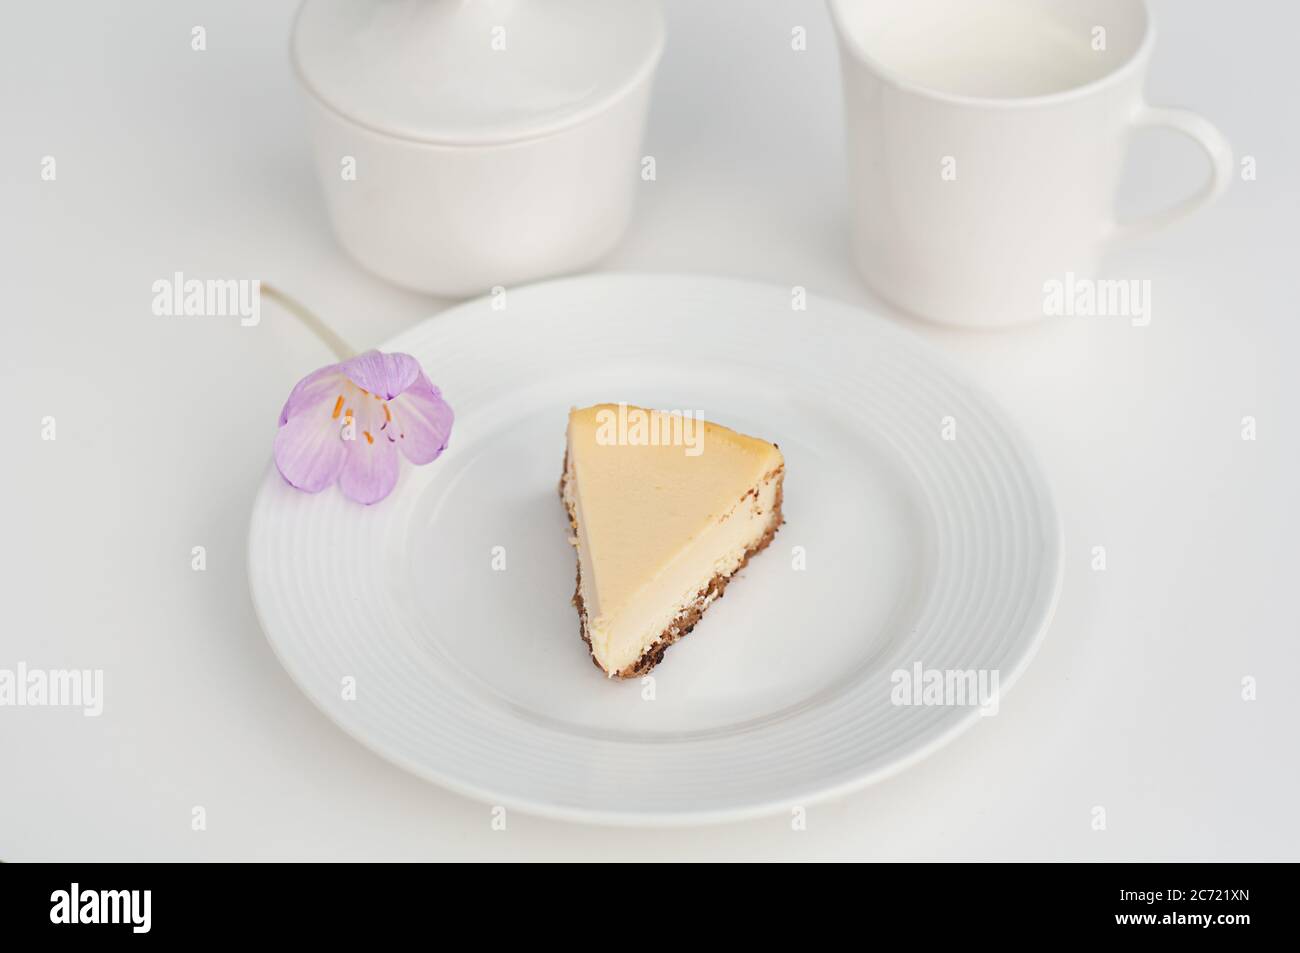 Cheesecake still life on a white plate with coffee cup and creamer on a light background.  Purple crocus flower as a garnish to this slice of bakery p Stock Photo